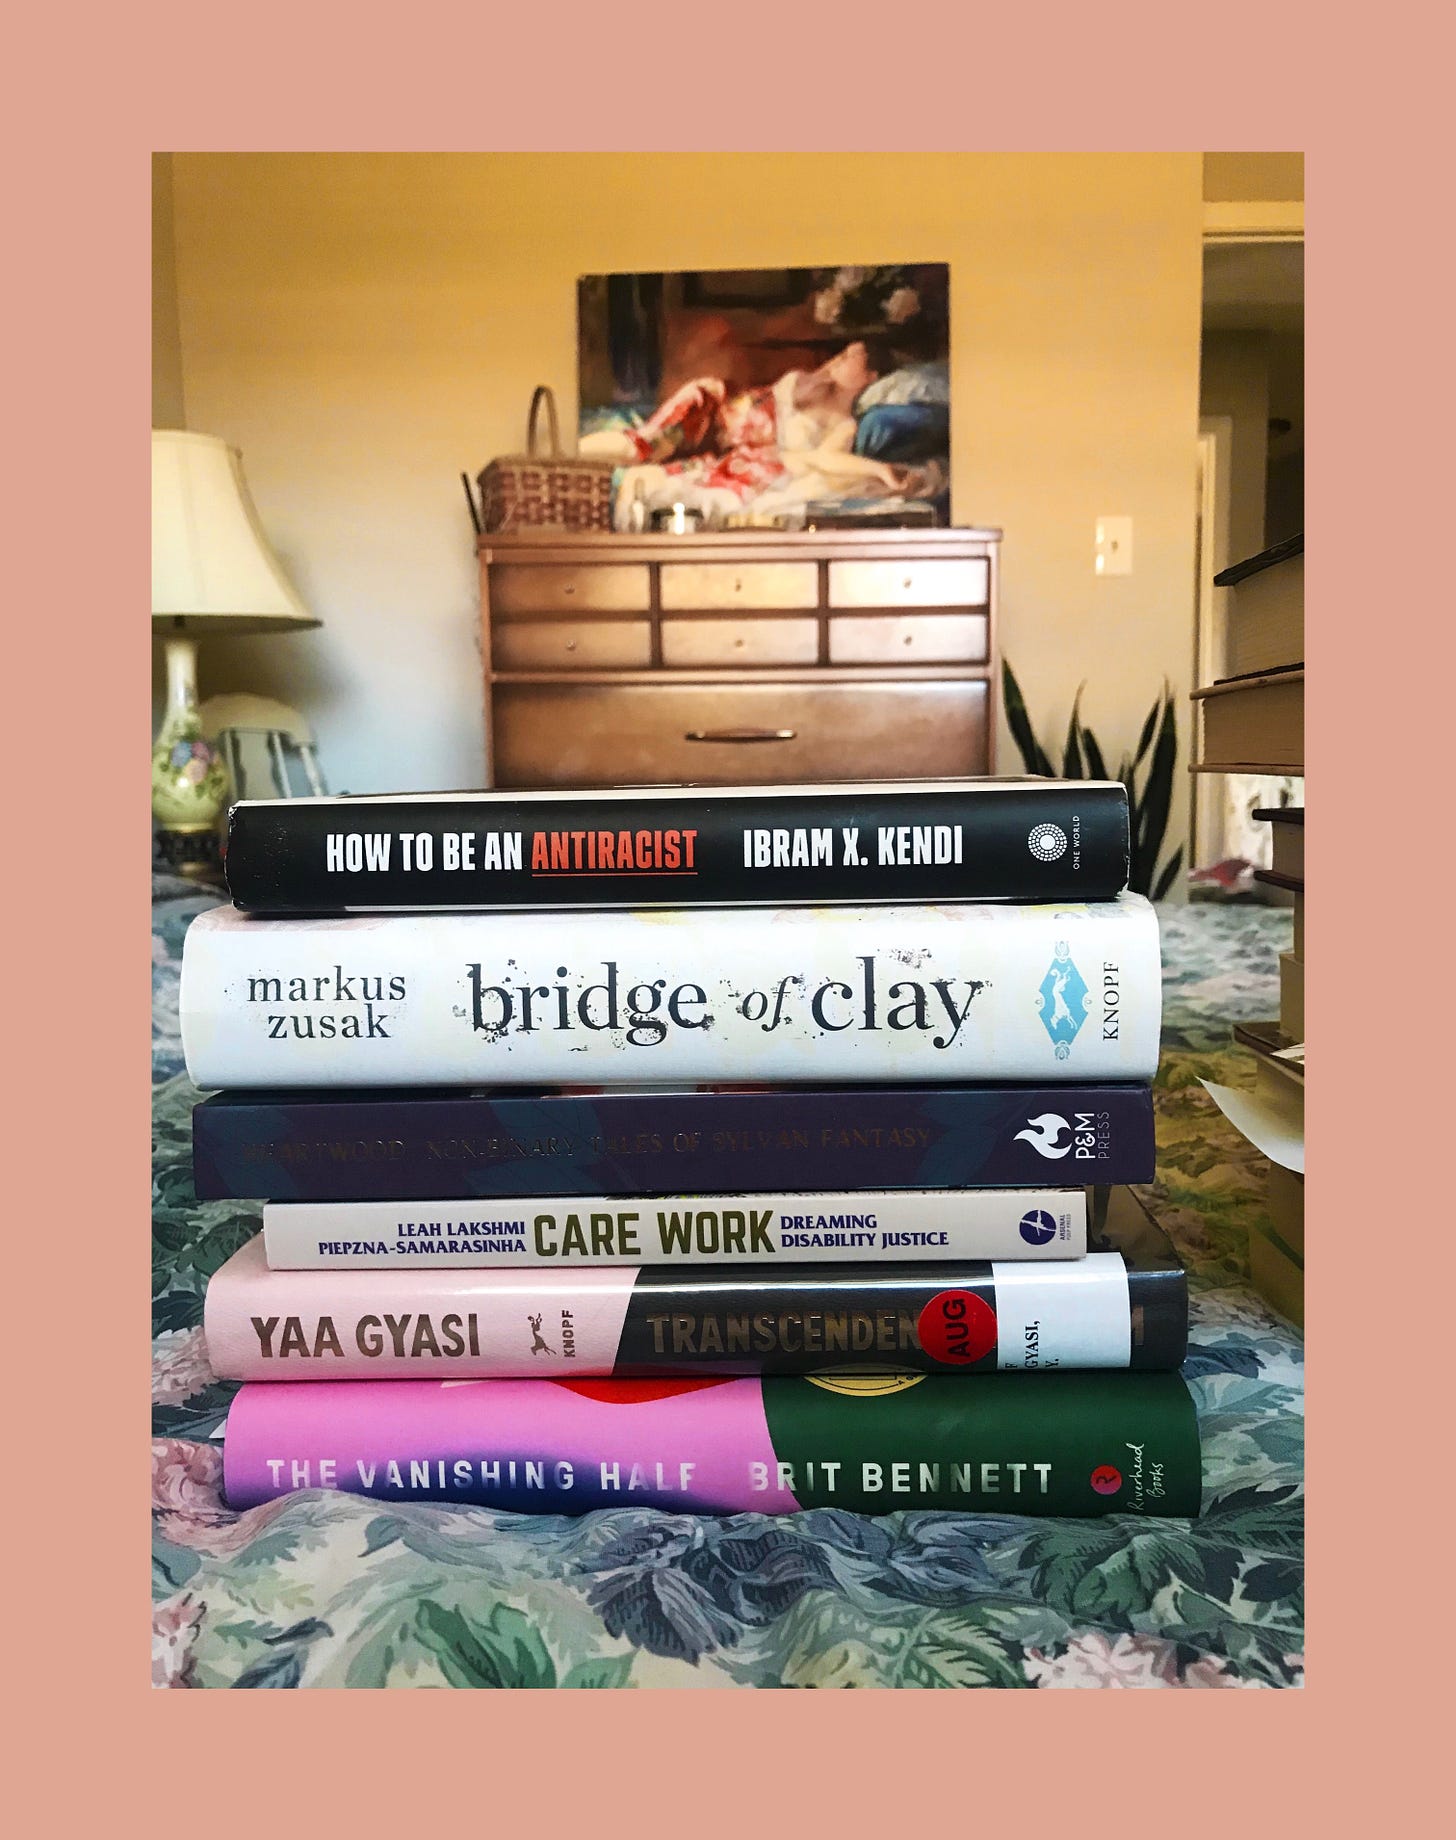 the six books mentioned below, stacked on a blue floral comforter on a bed. a dresser is in the background.